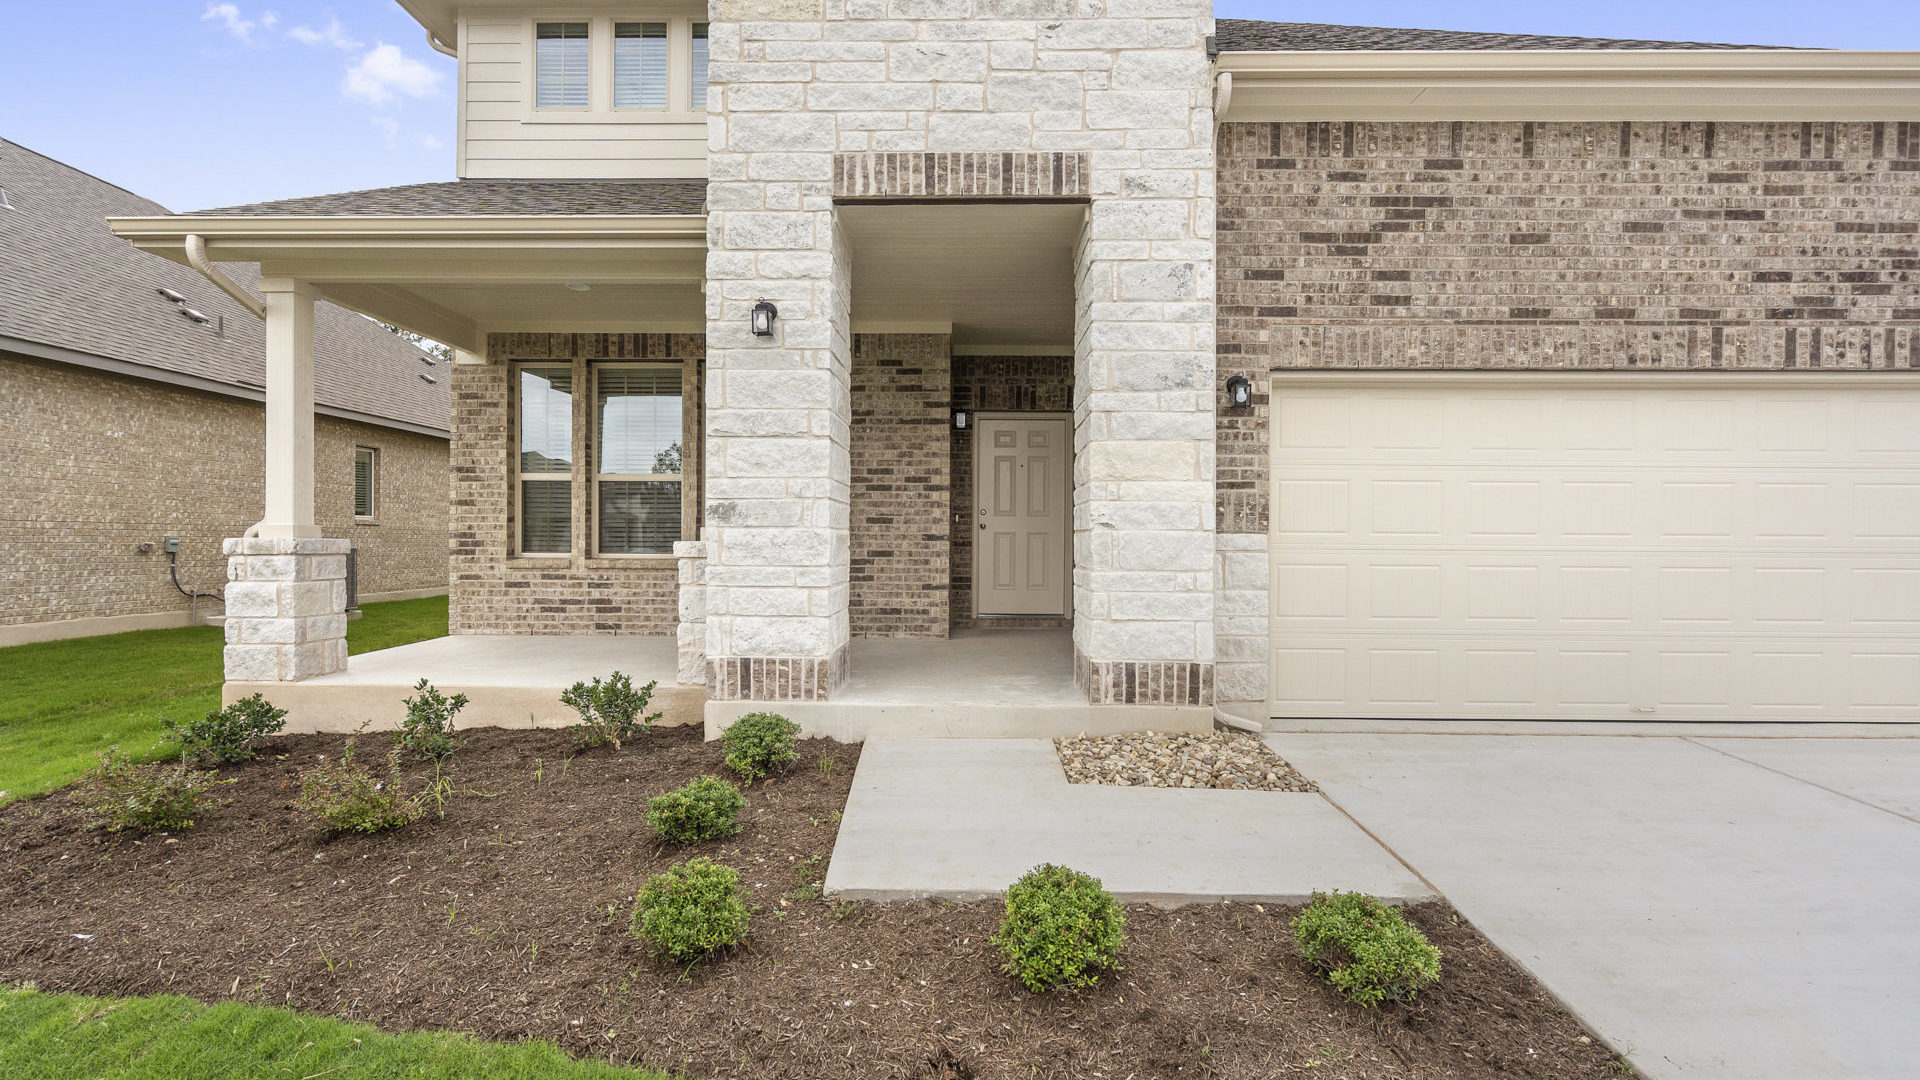 Star Ranch new homes in Hutto, TX